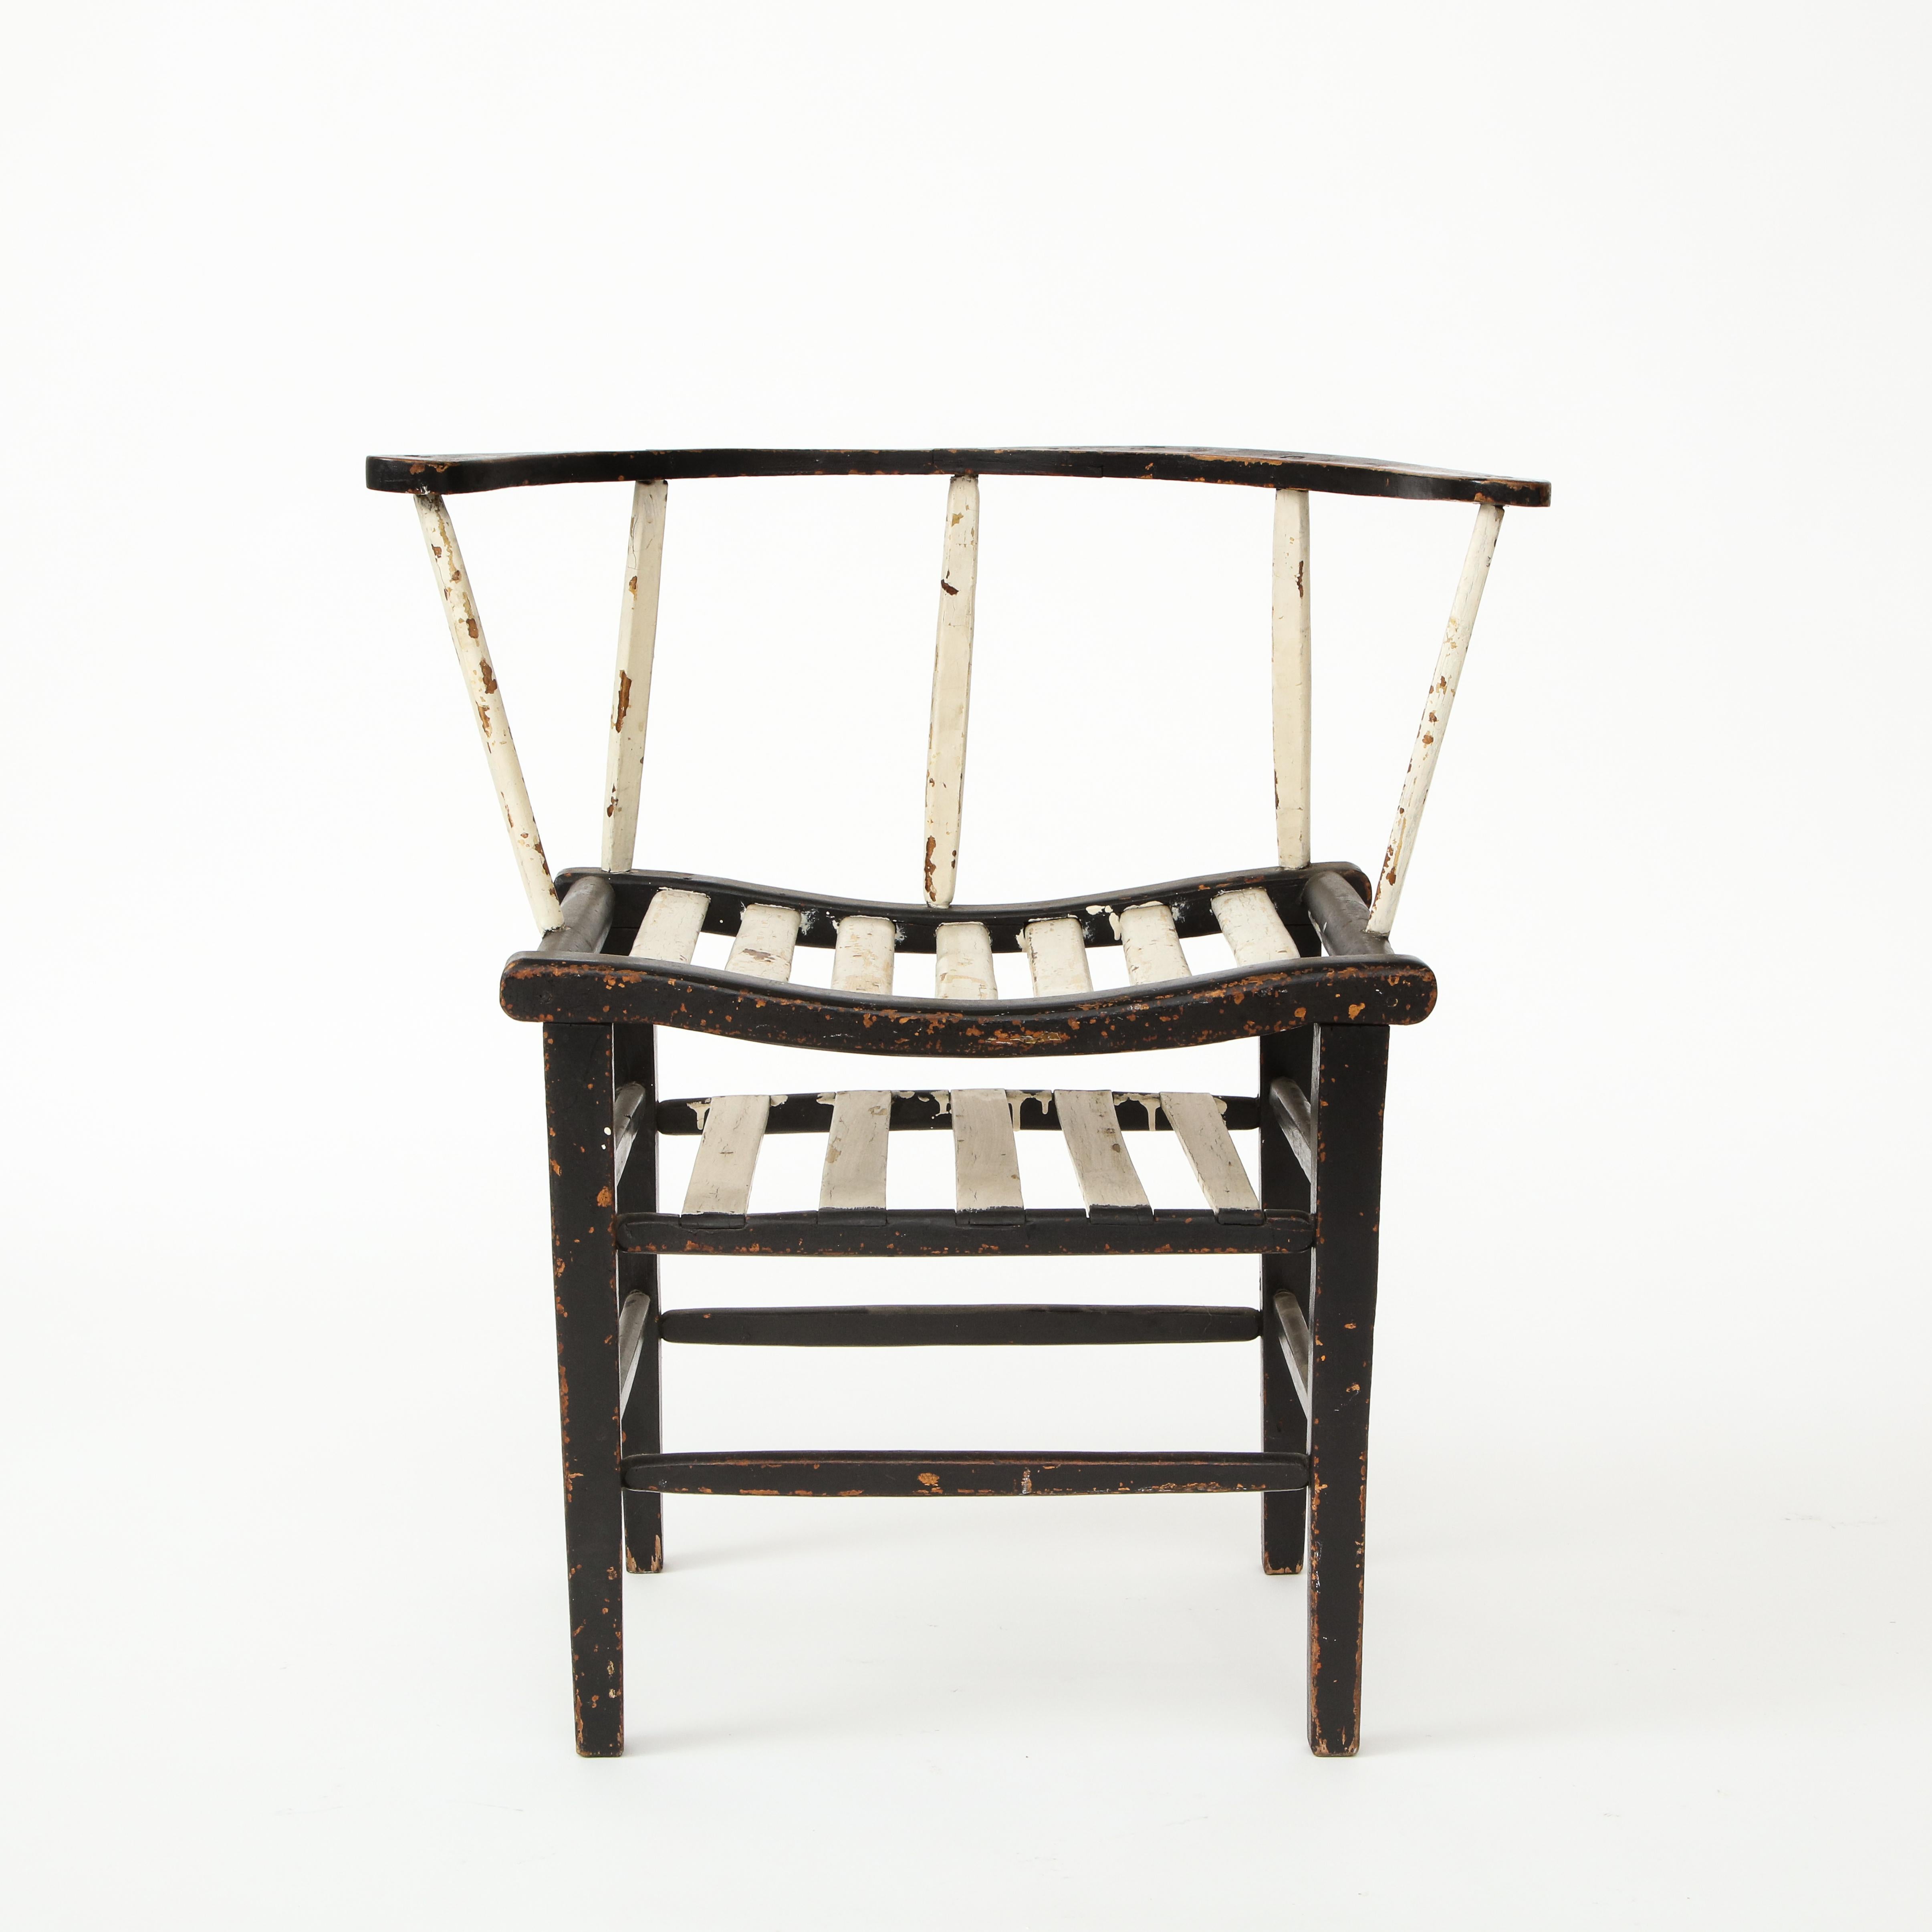 French Provincial Sculptural Painted Black and White Rustic Armchair, France 19th Century